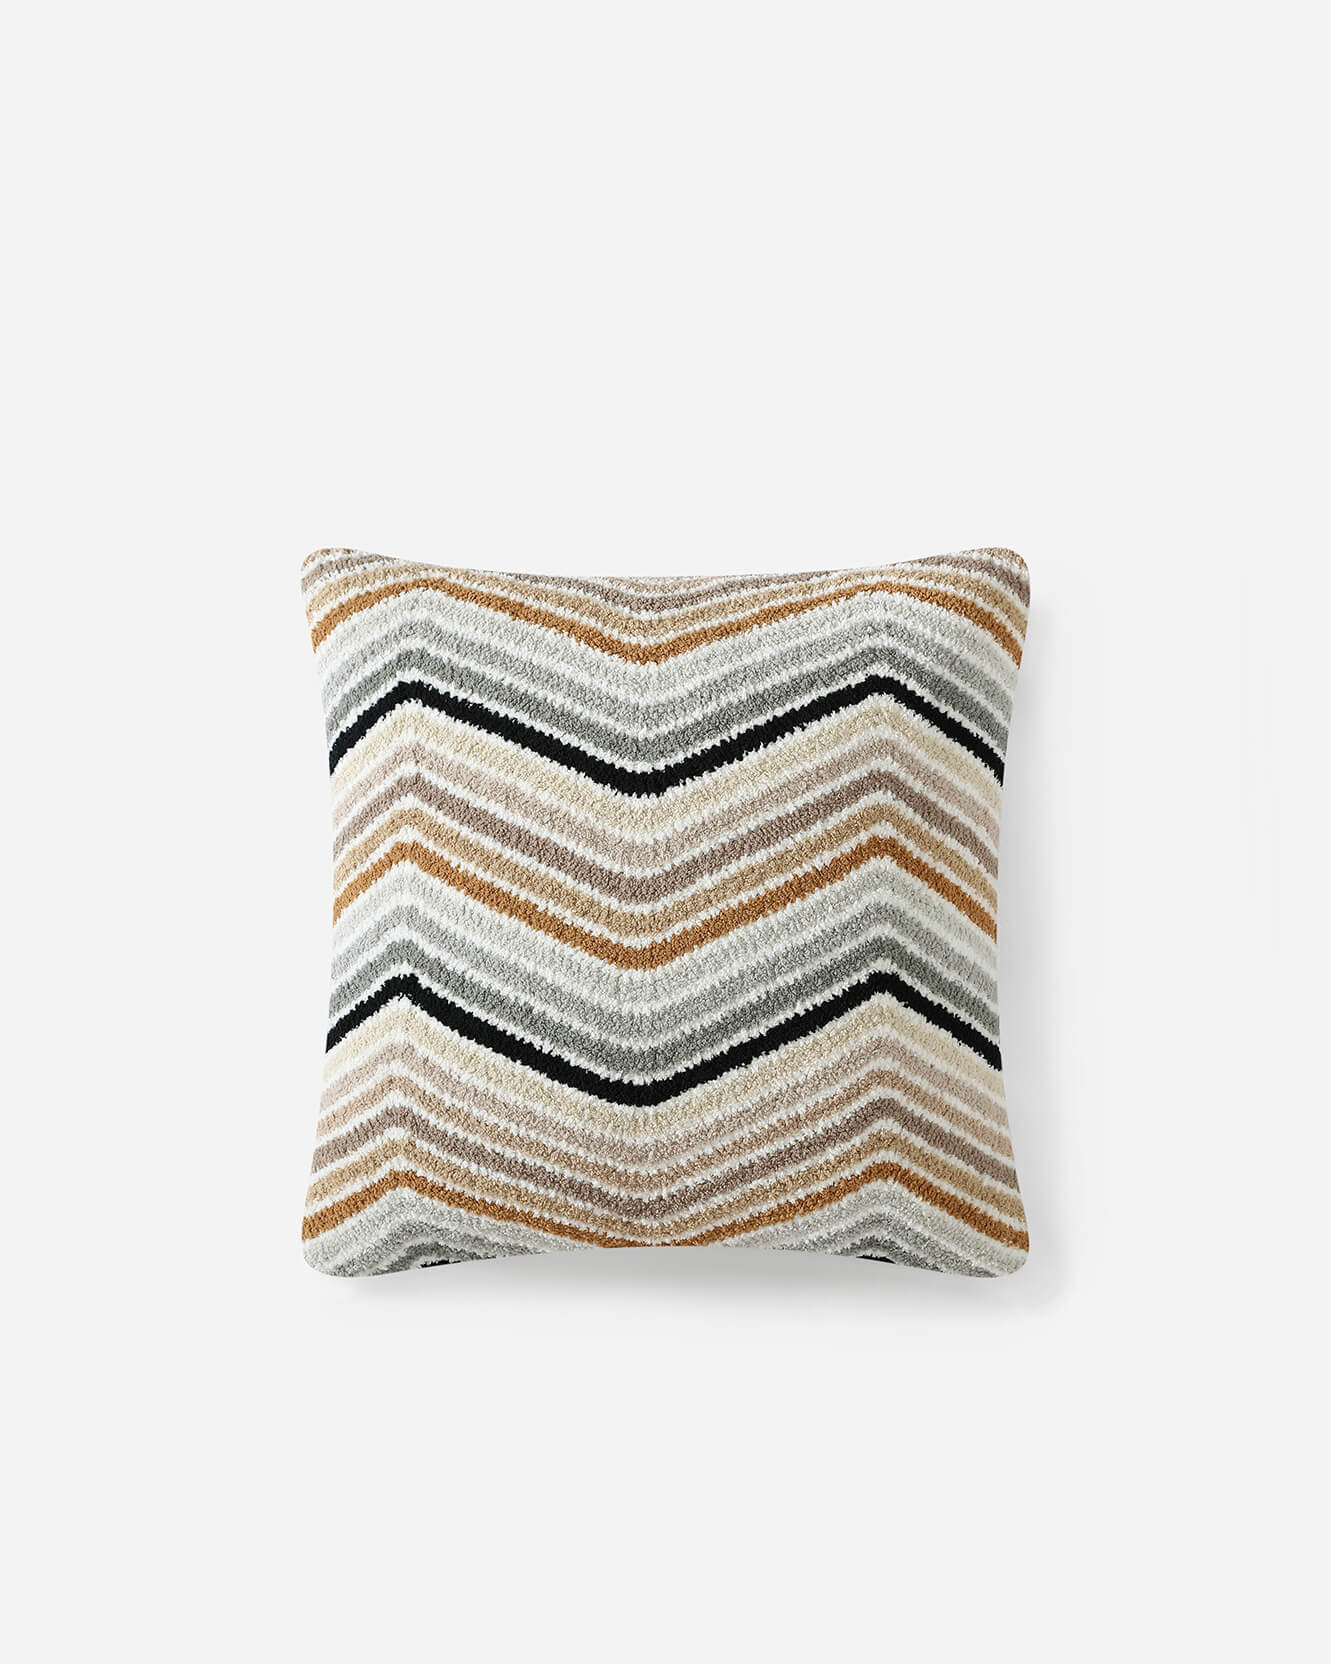 A rectangular Cusco Throw Pillow by Sunday Citizen featuring a zigzag pattern in shades of beige, brown, black, and white. The memory foam filling provides exceptional comfort while the machine washable cover makes it easy to clean. The pillow is positioned against a plain white background.